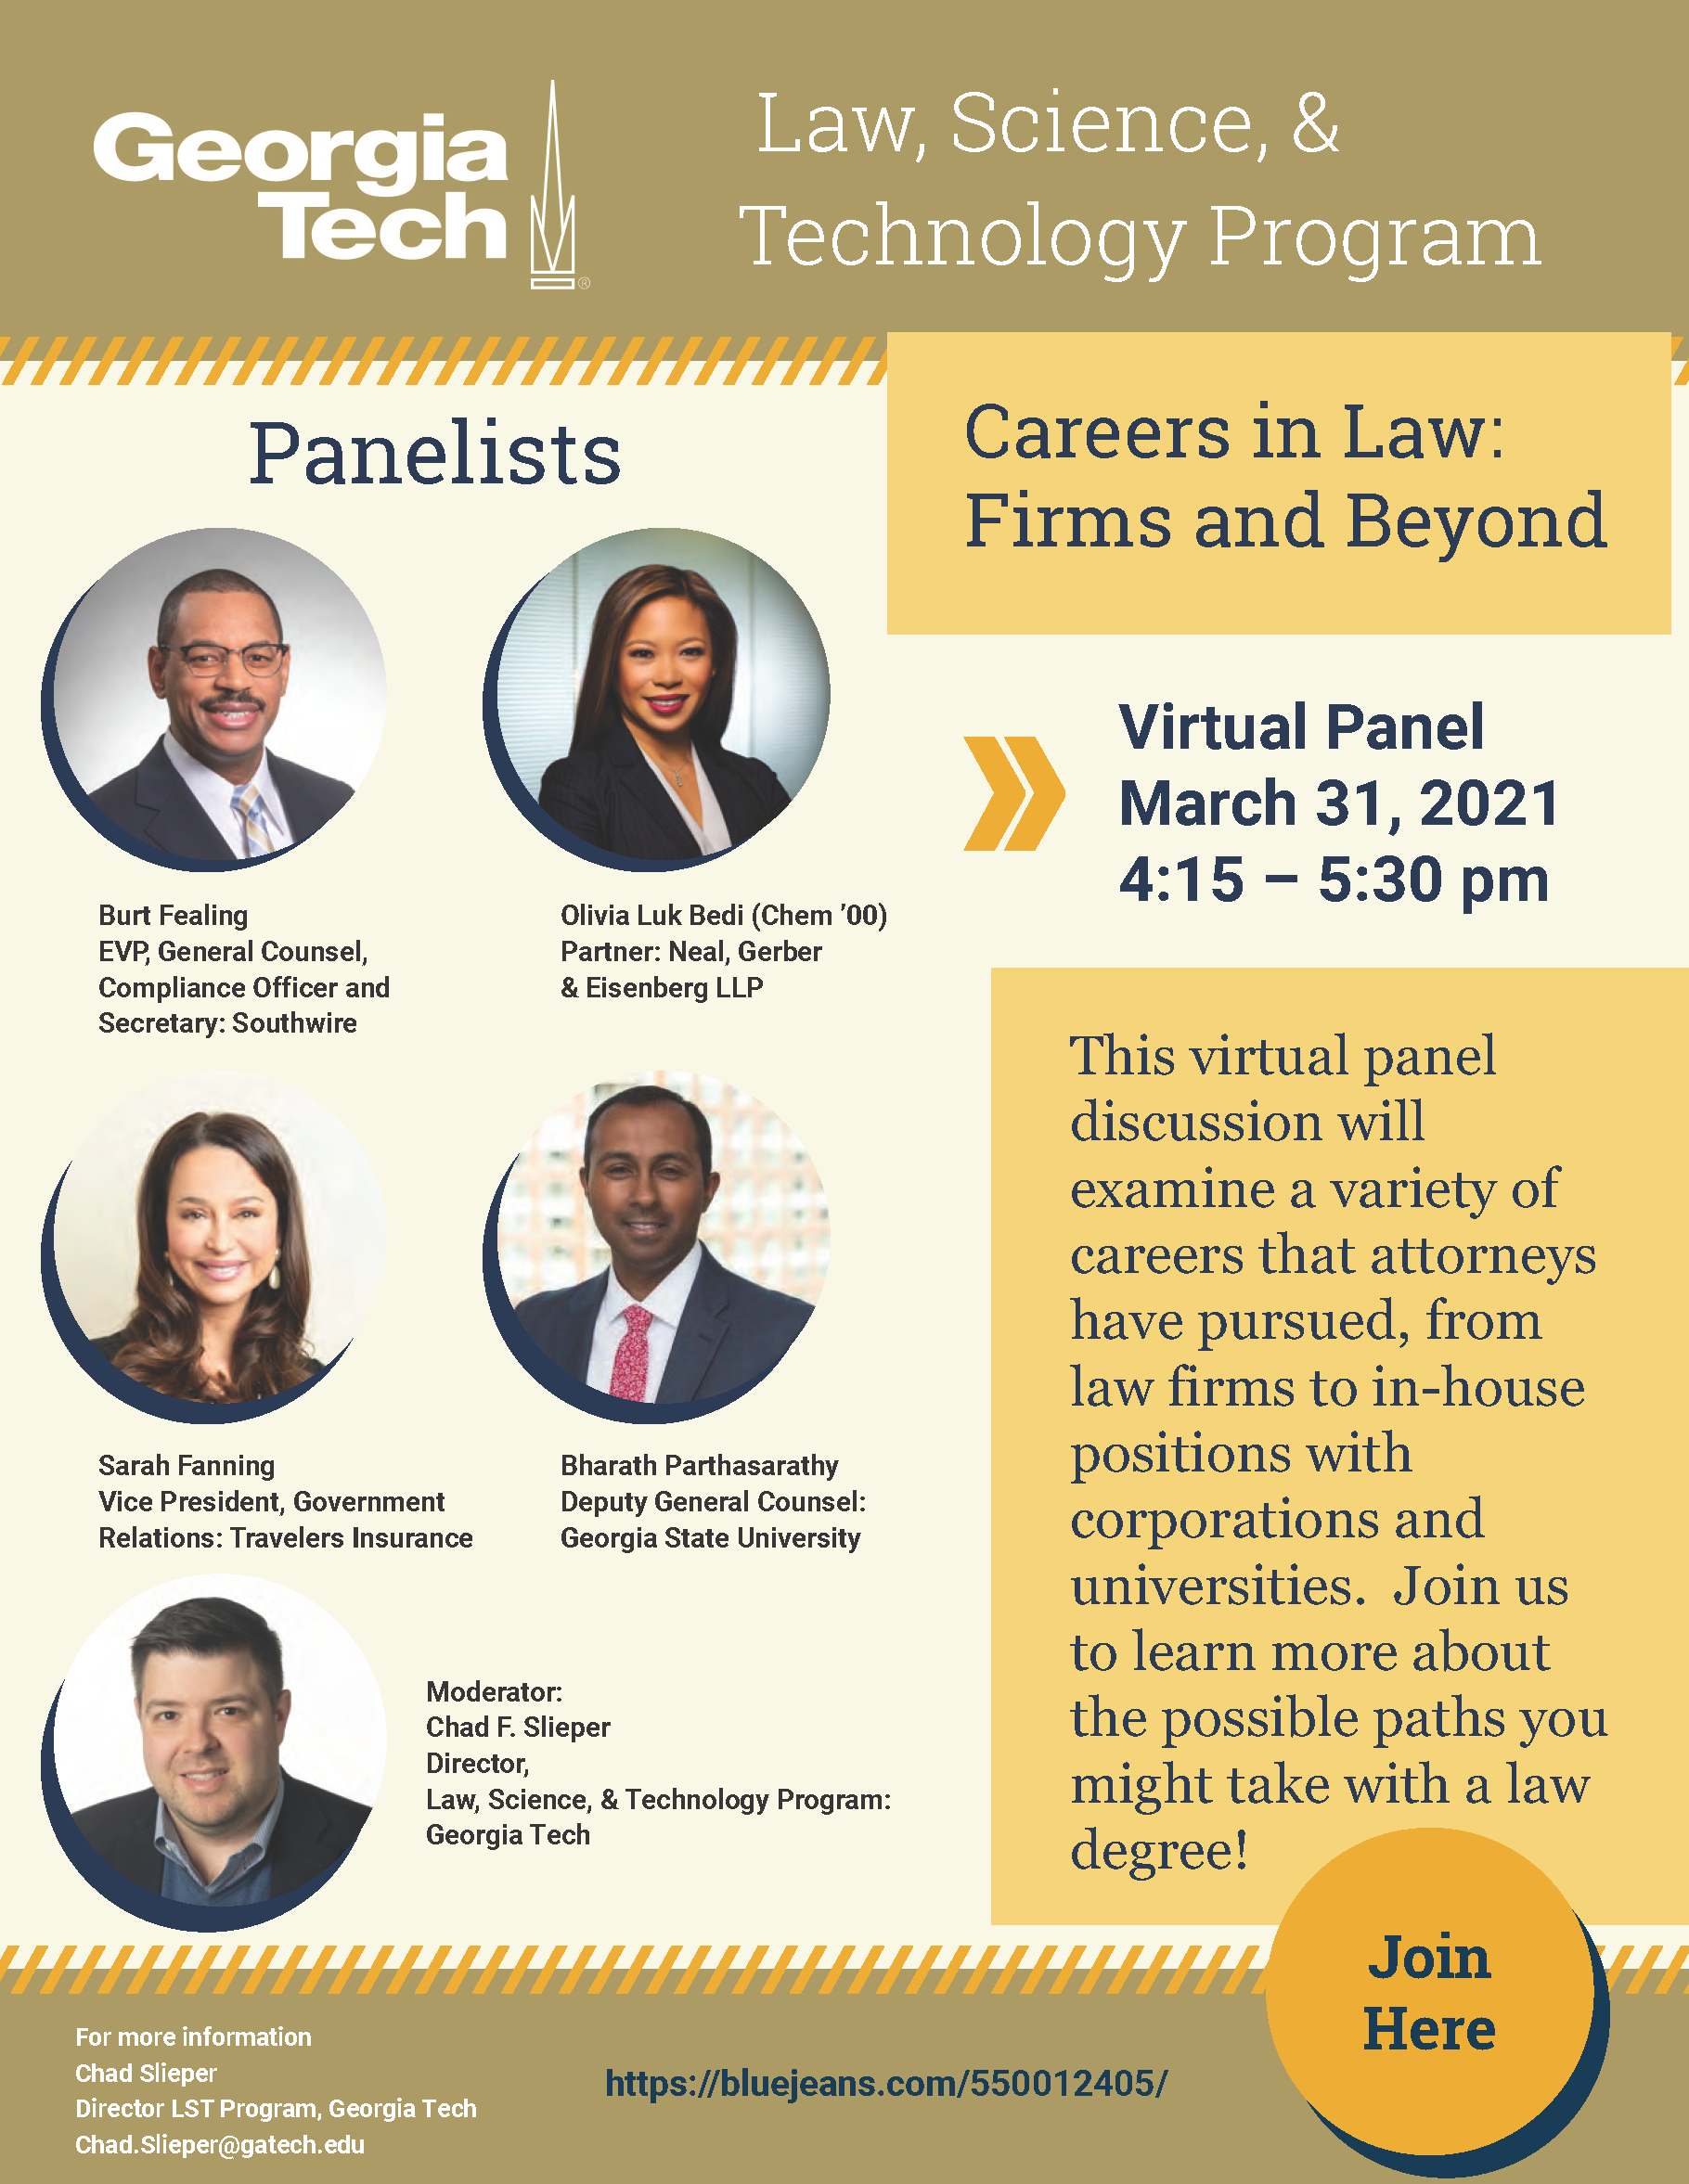 A flyer for a virtual panel discussion of the careers that attorney s have pursued